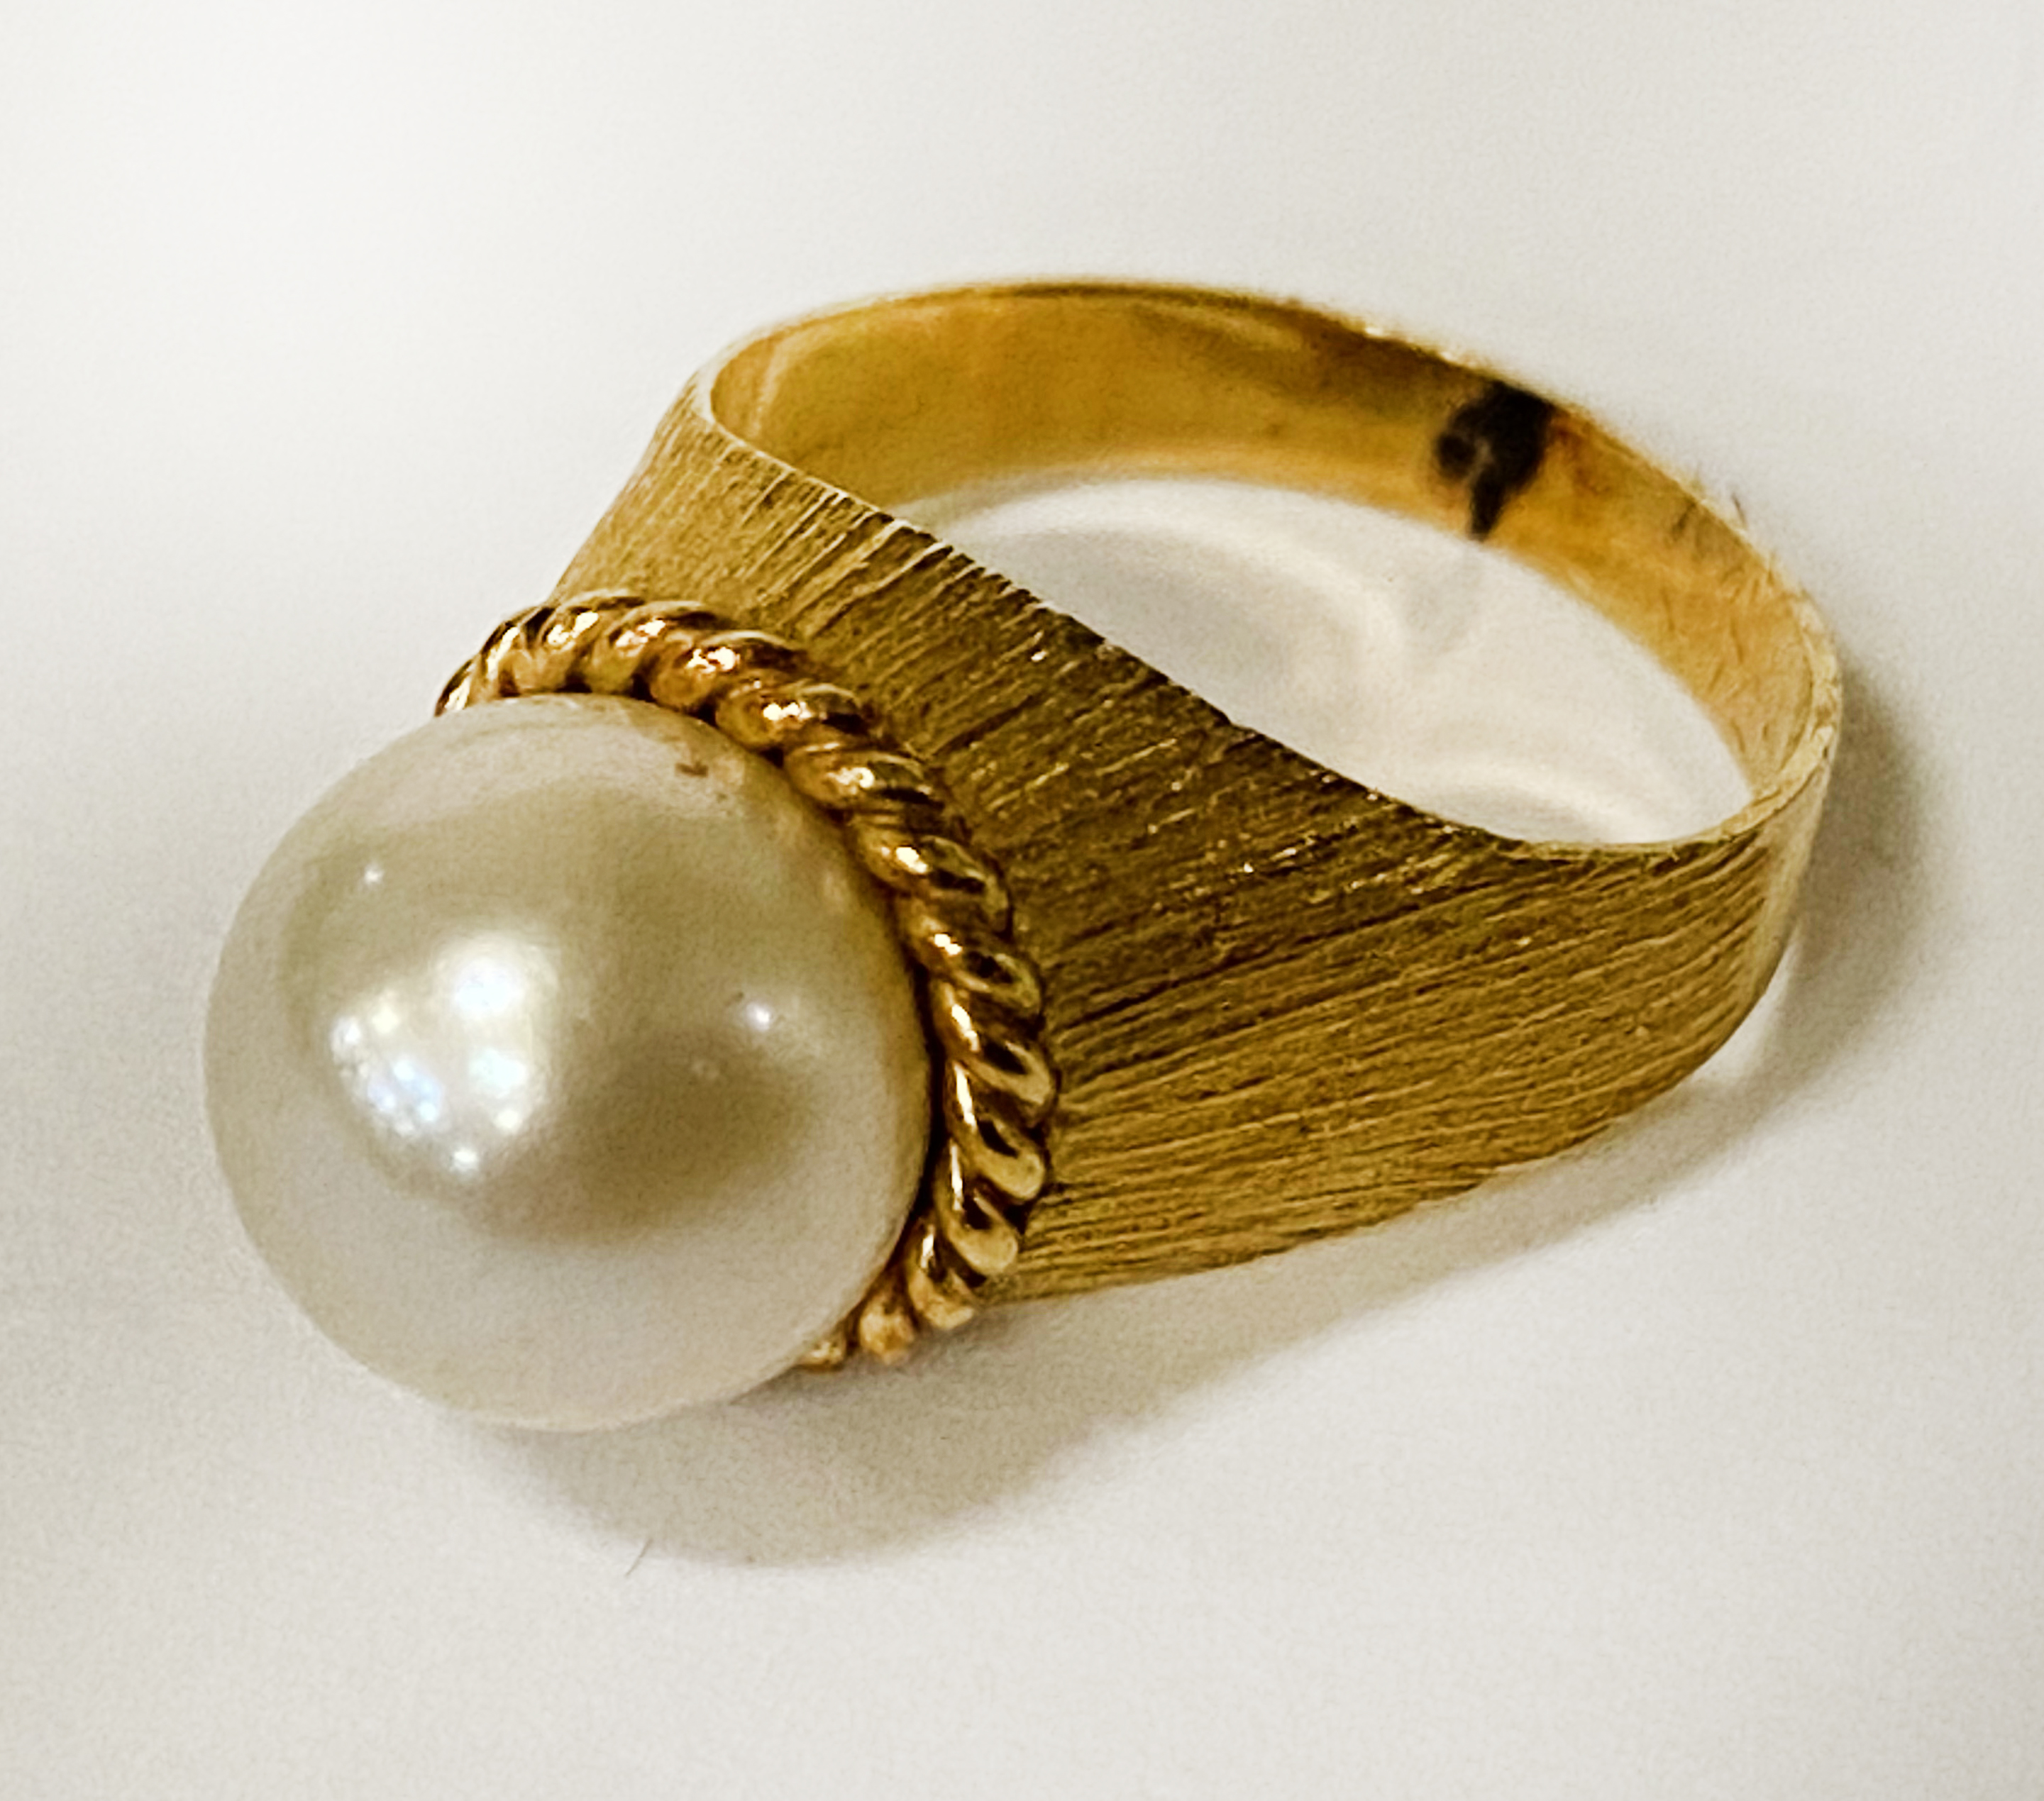 18CT GOLD & PEARL RING - SIZE H - 4.1 GRAMS APPROX